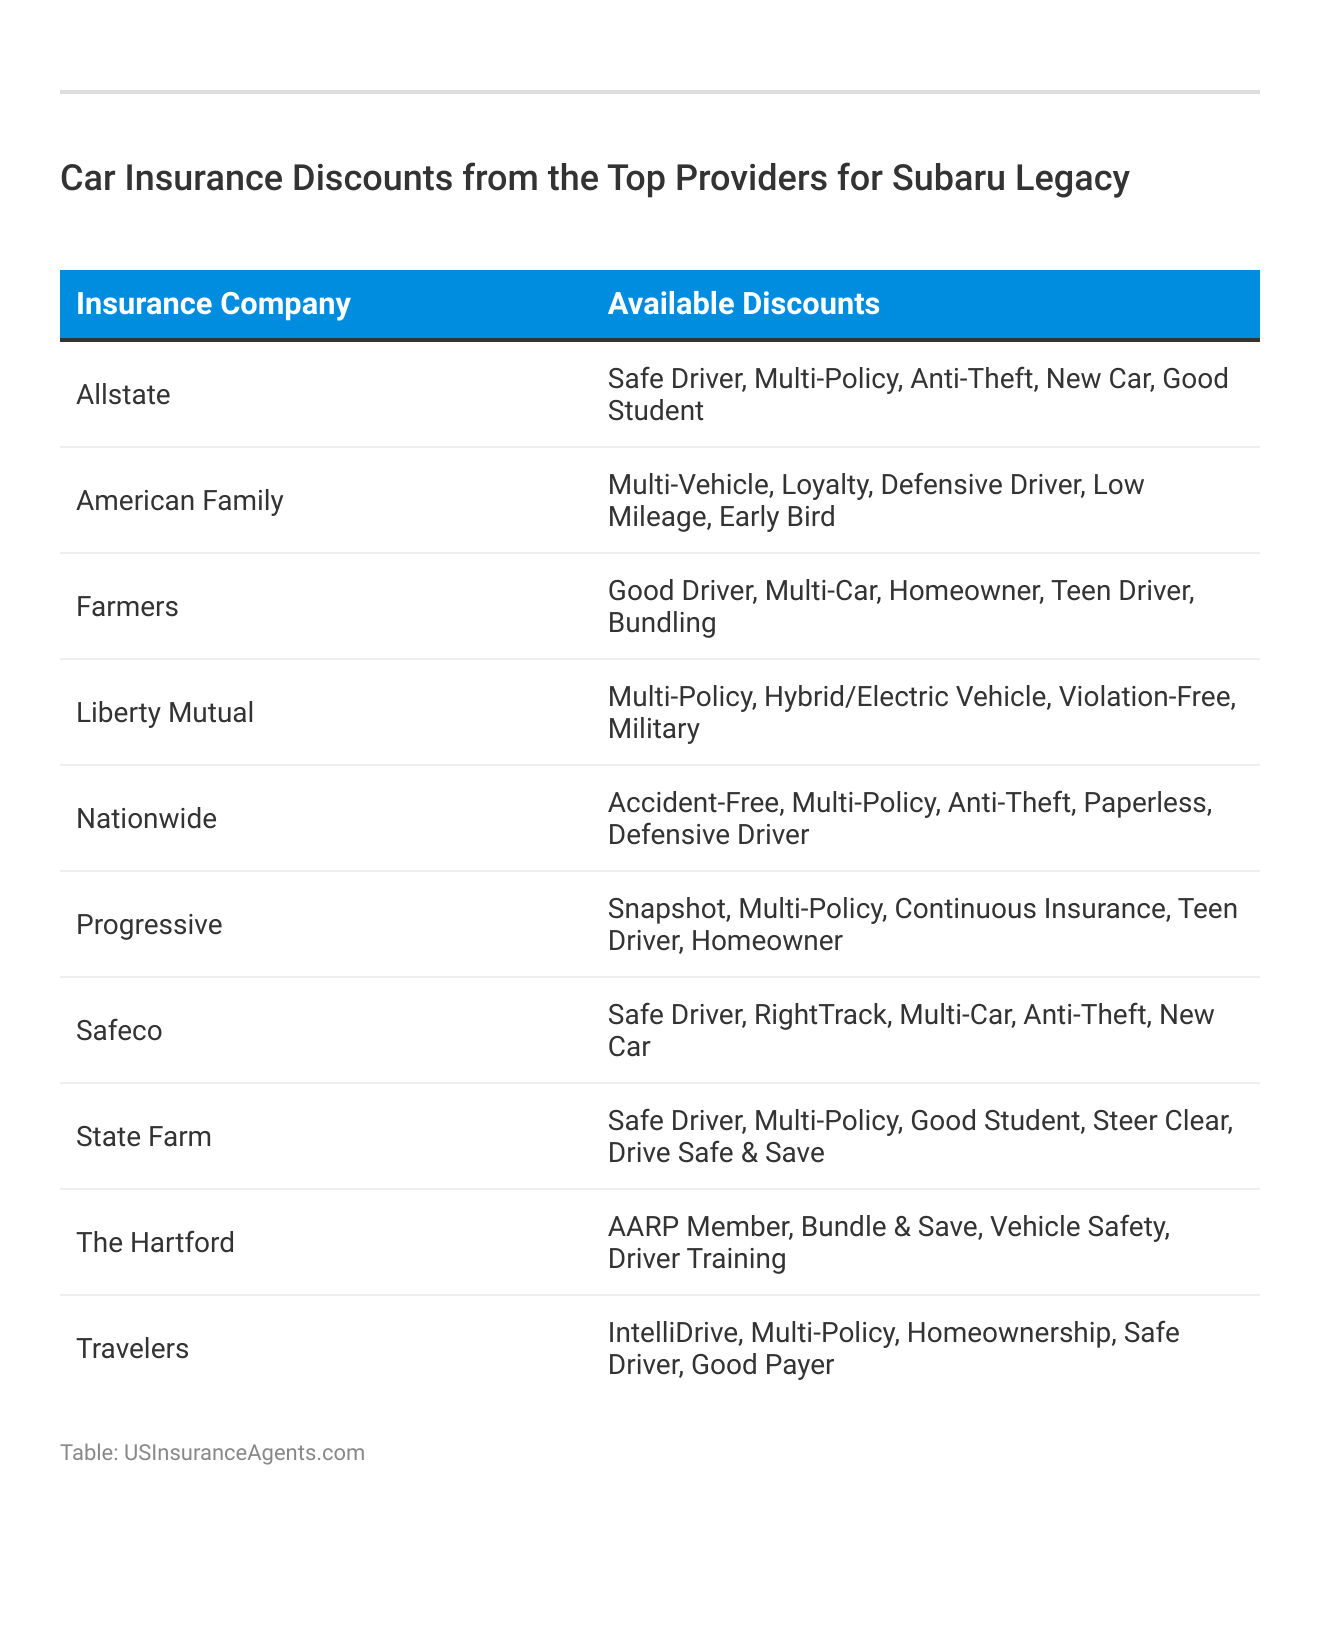 <h3>Car Insurance Discounts from the Top Providers for Subaru Legacy</h3> 